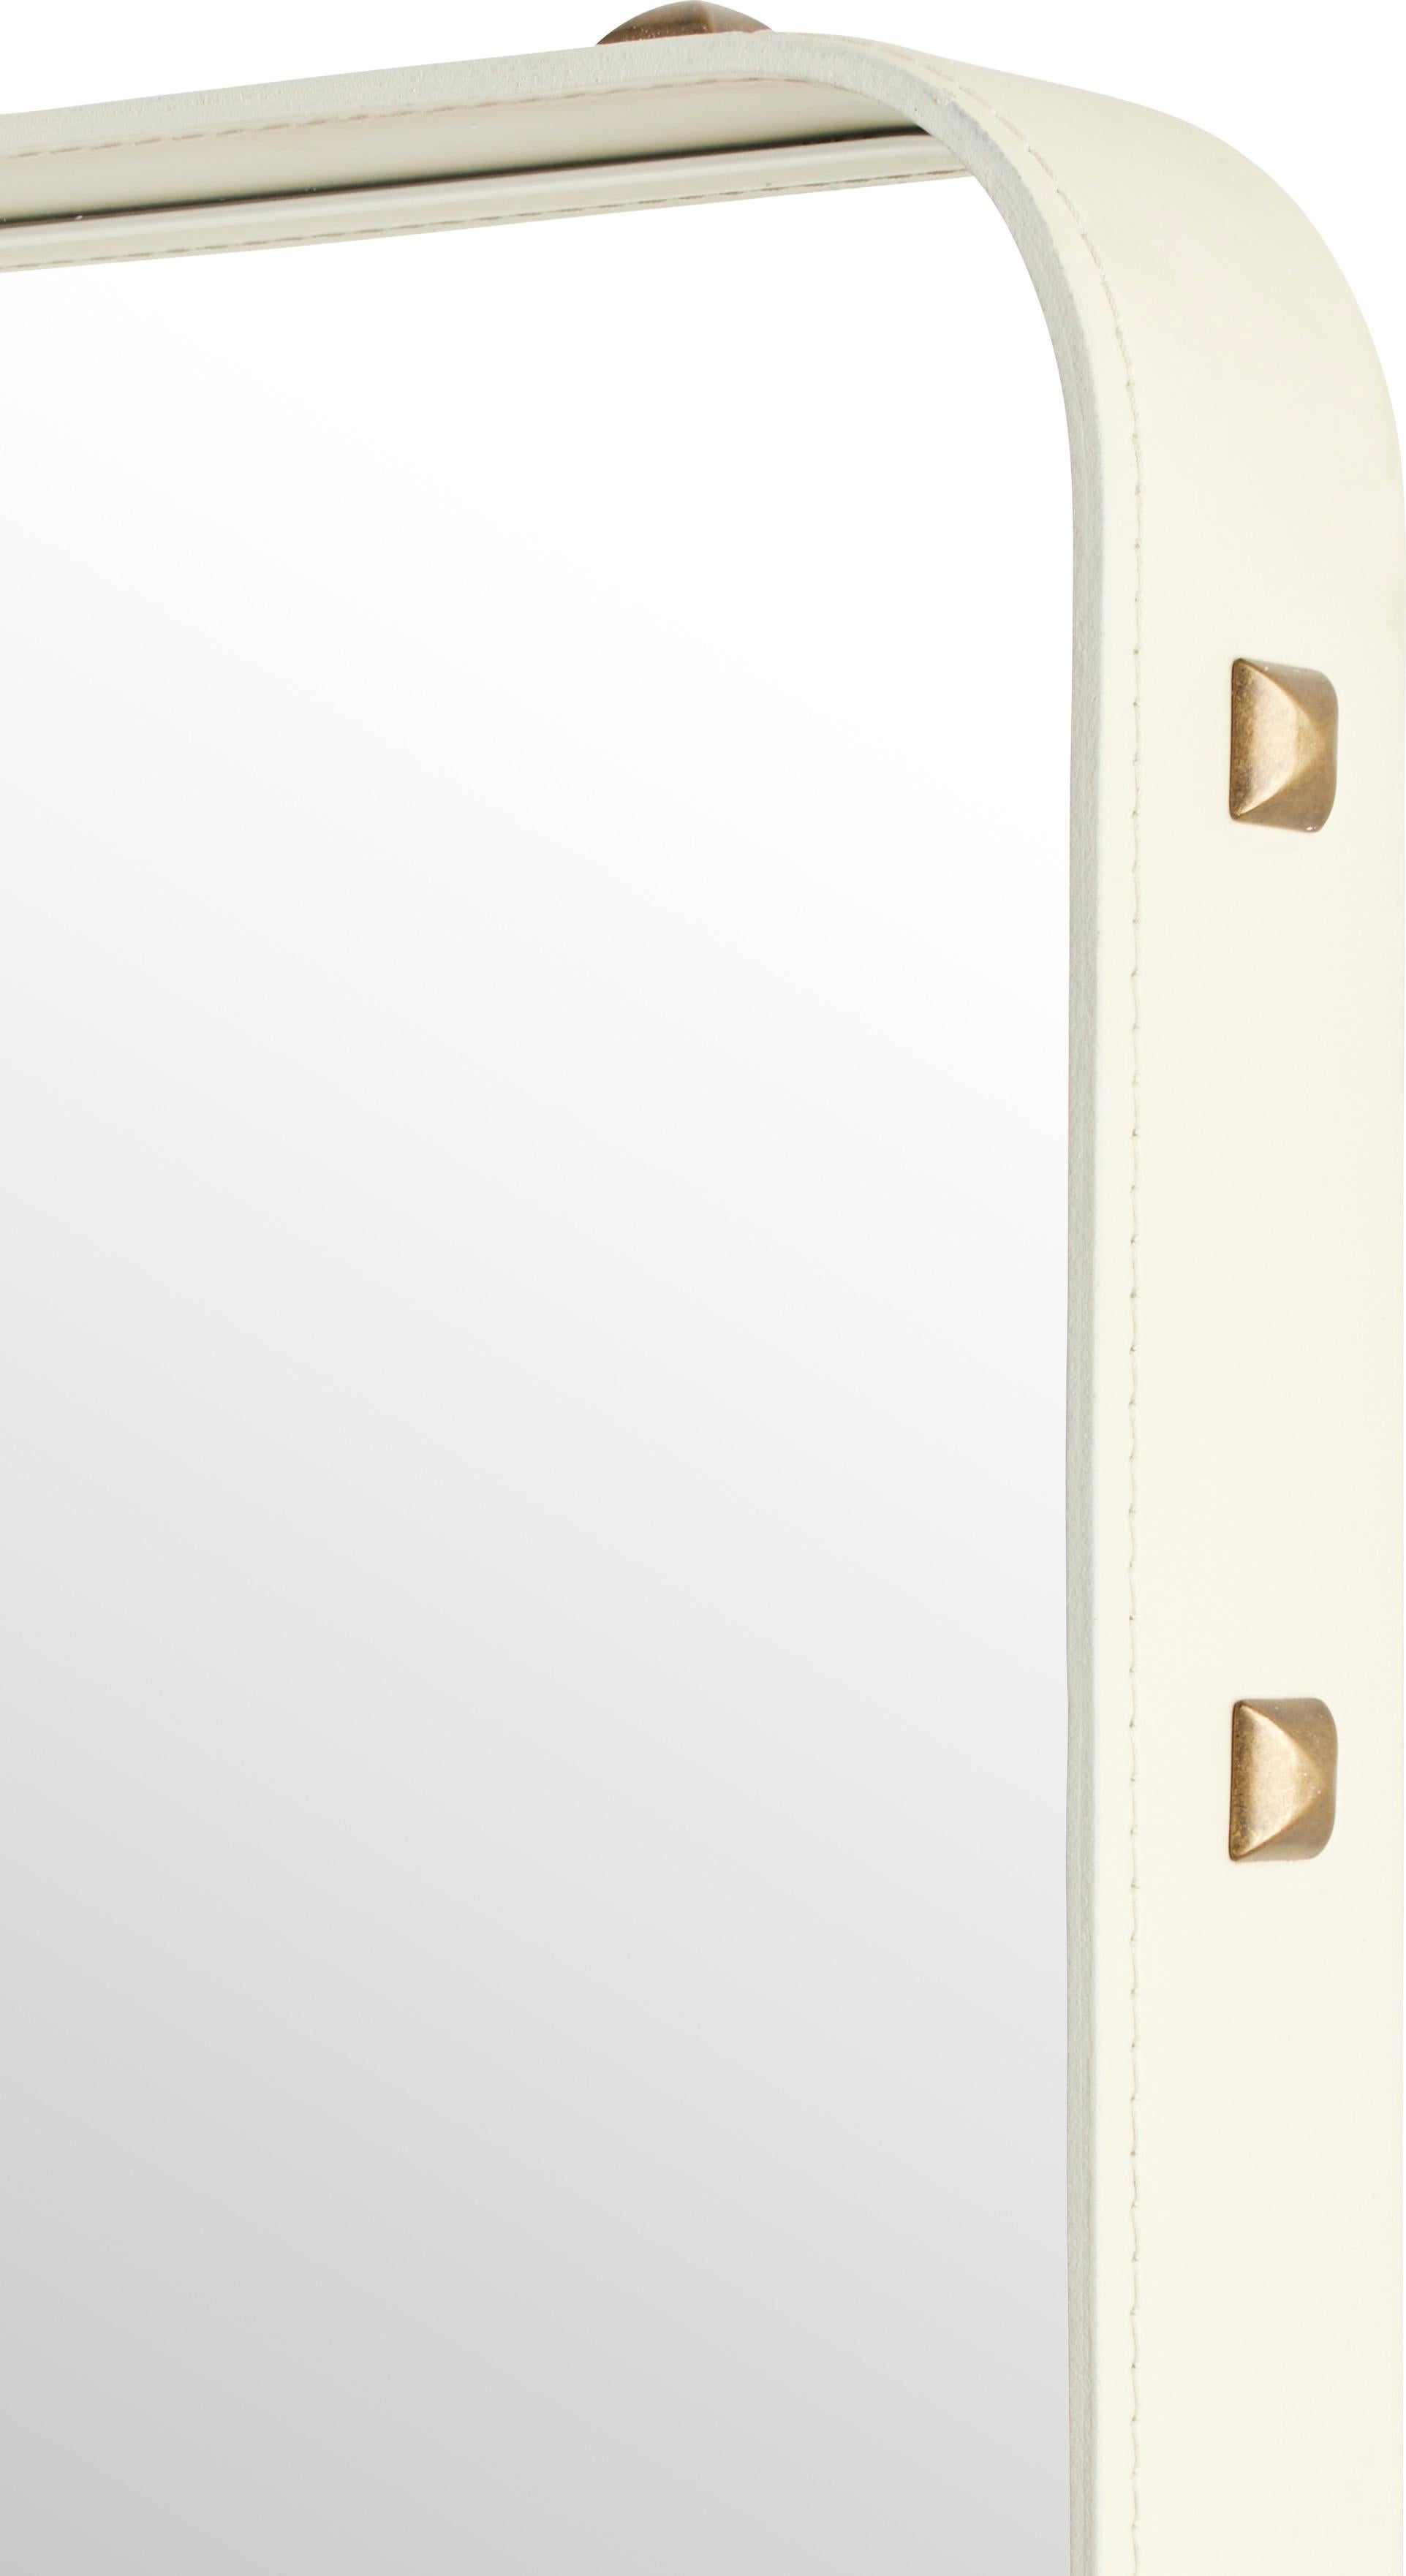 Danish Large Jacques Adnet 'Rectangulaire Mirror' Wall Mirror in Cream Leather for GUBI For Sale